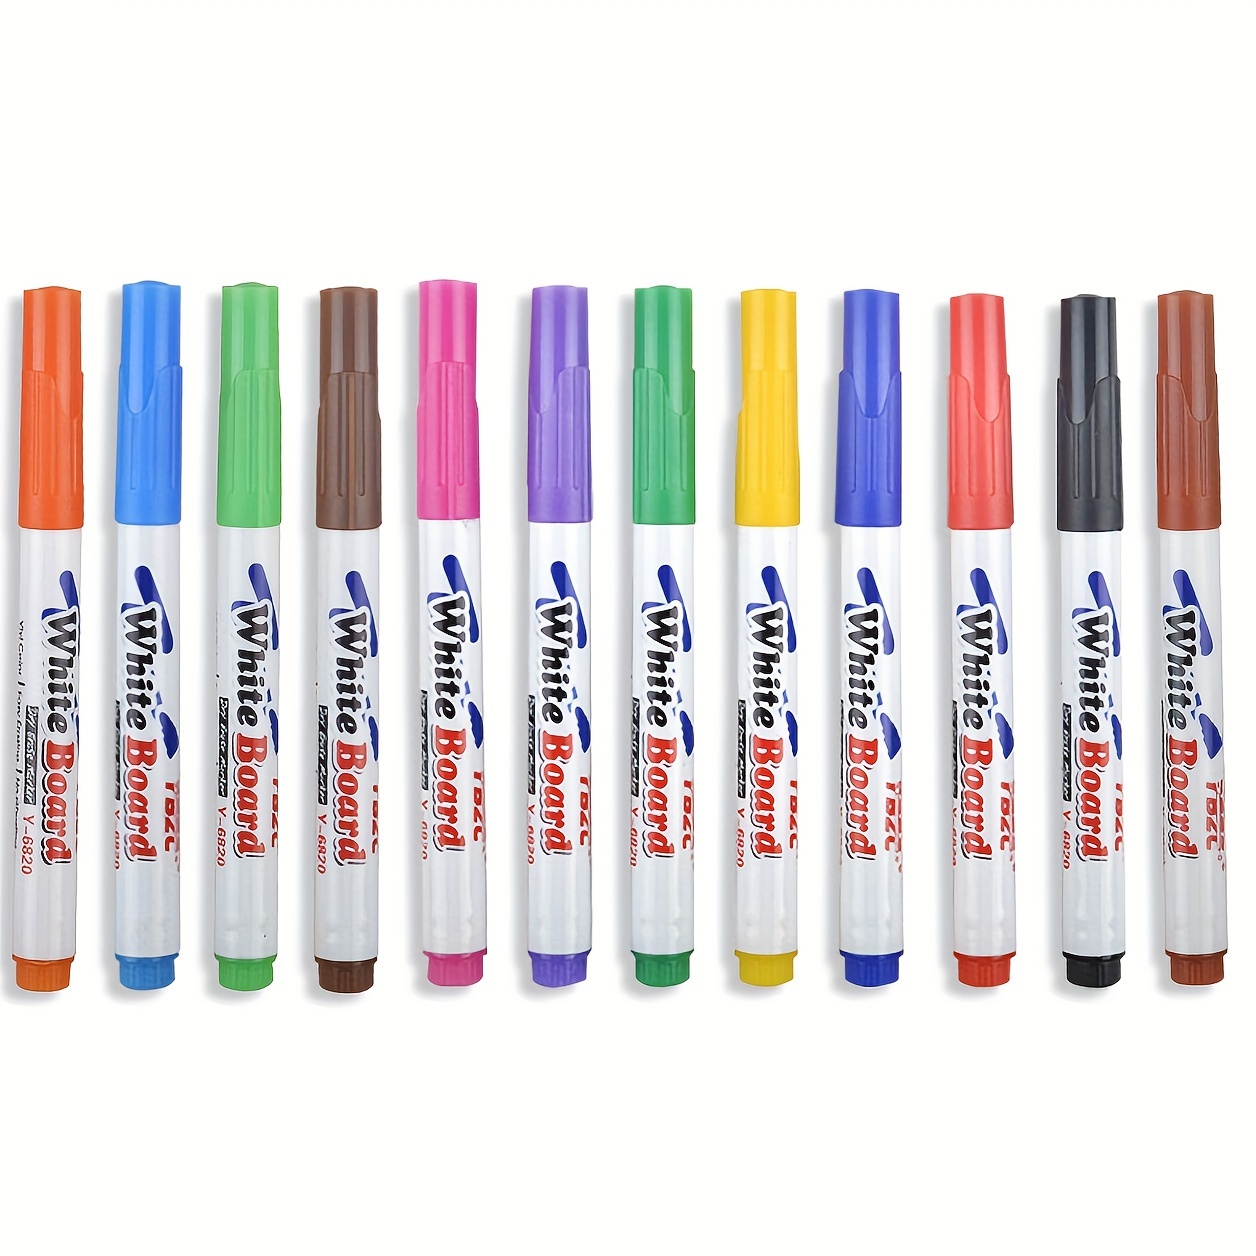 Colorful Whiteboard Markers Magical Water Painting Pens with Spoon